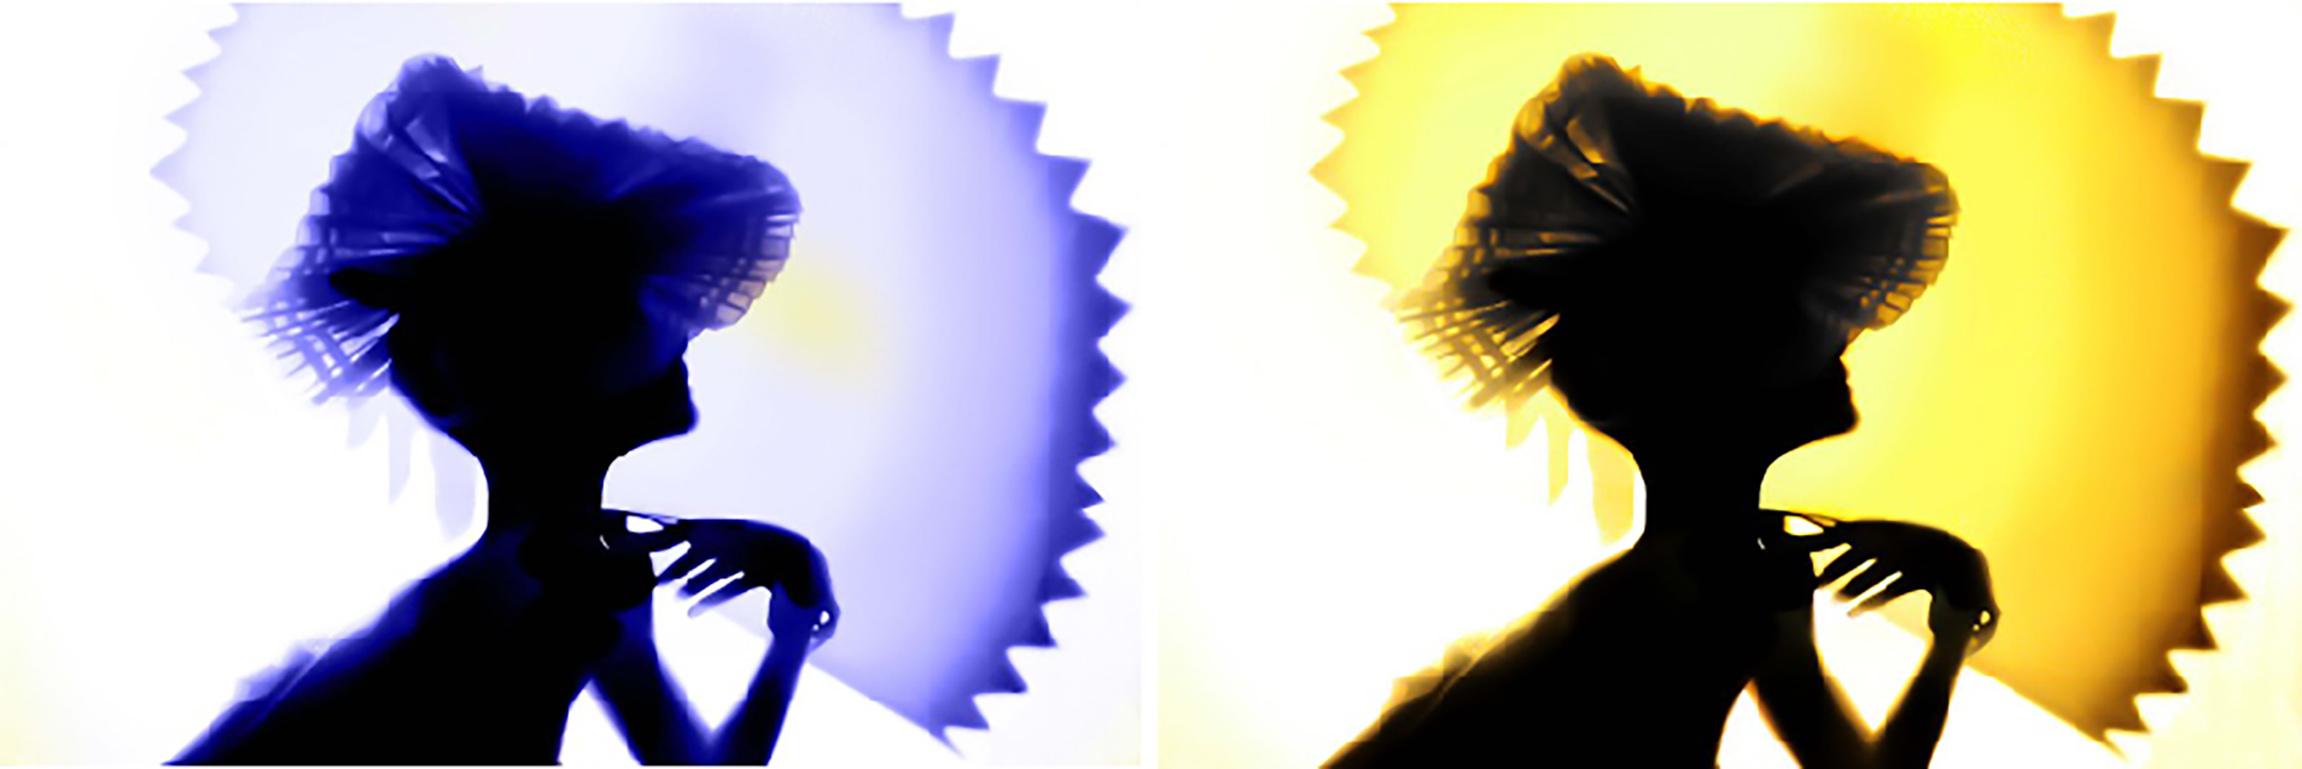 Dora Franco Abstract Photograph - Back Lighting, Blue Yellow Diptych. 